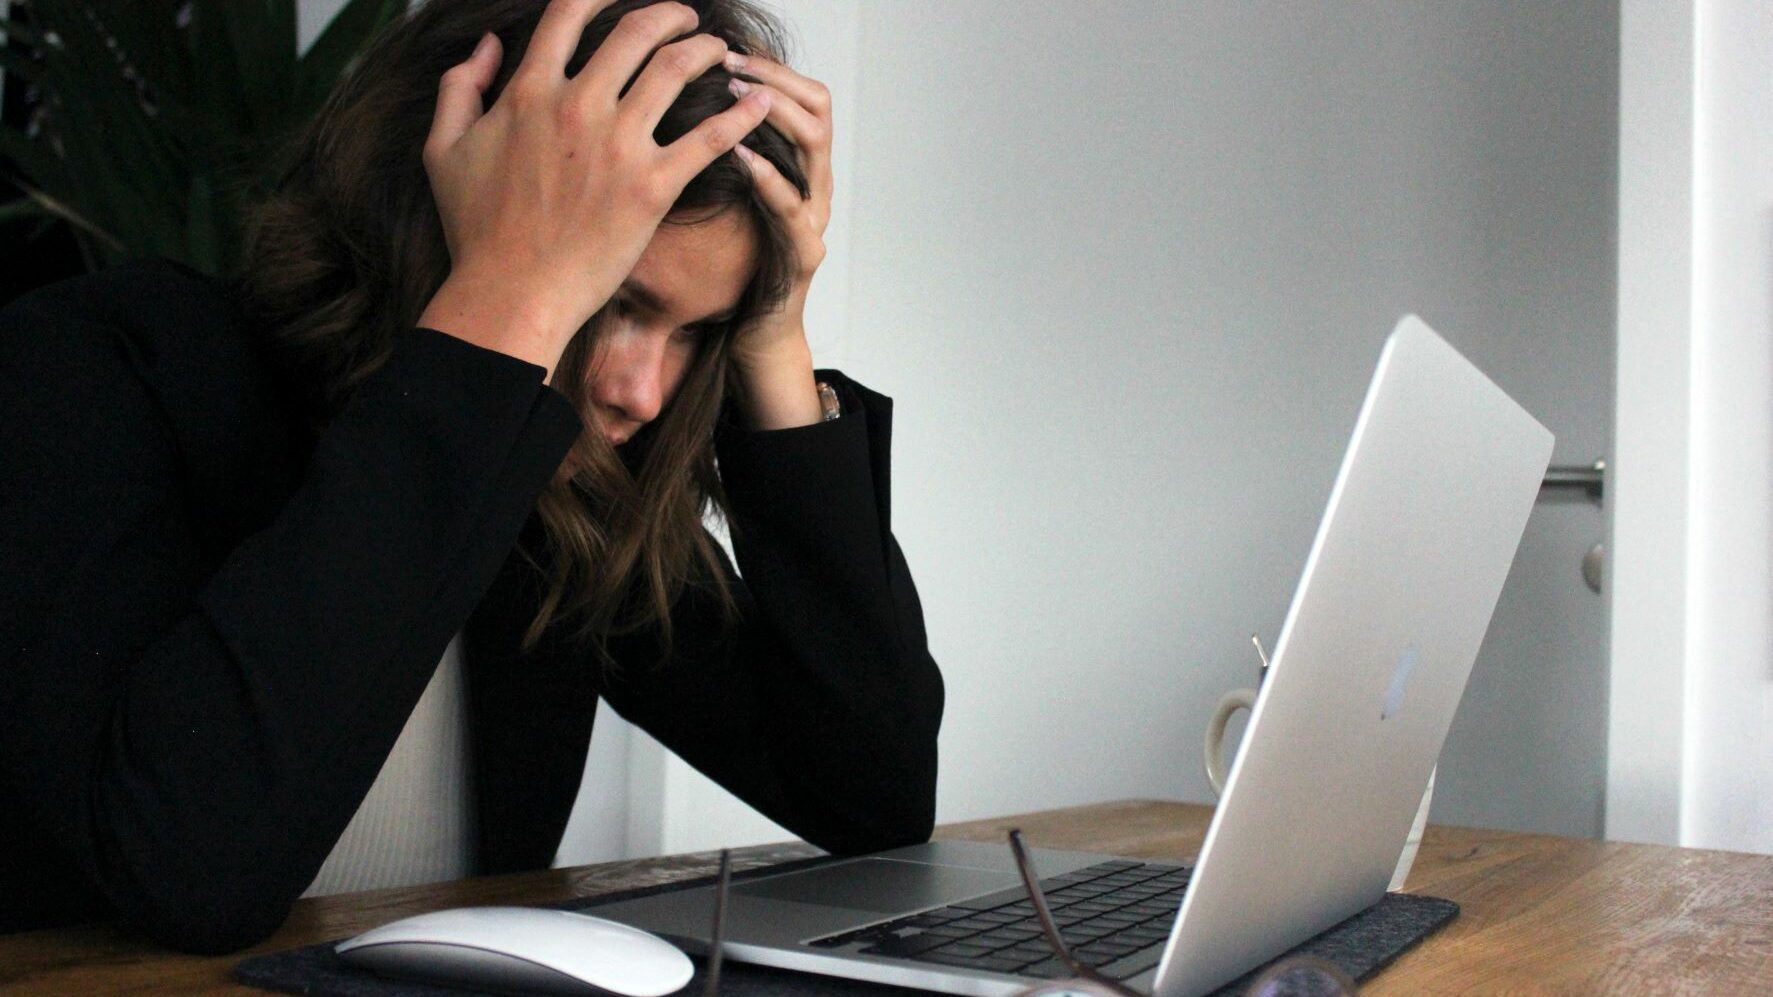 A person looking stressed in front of a laptop.